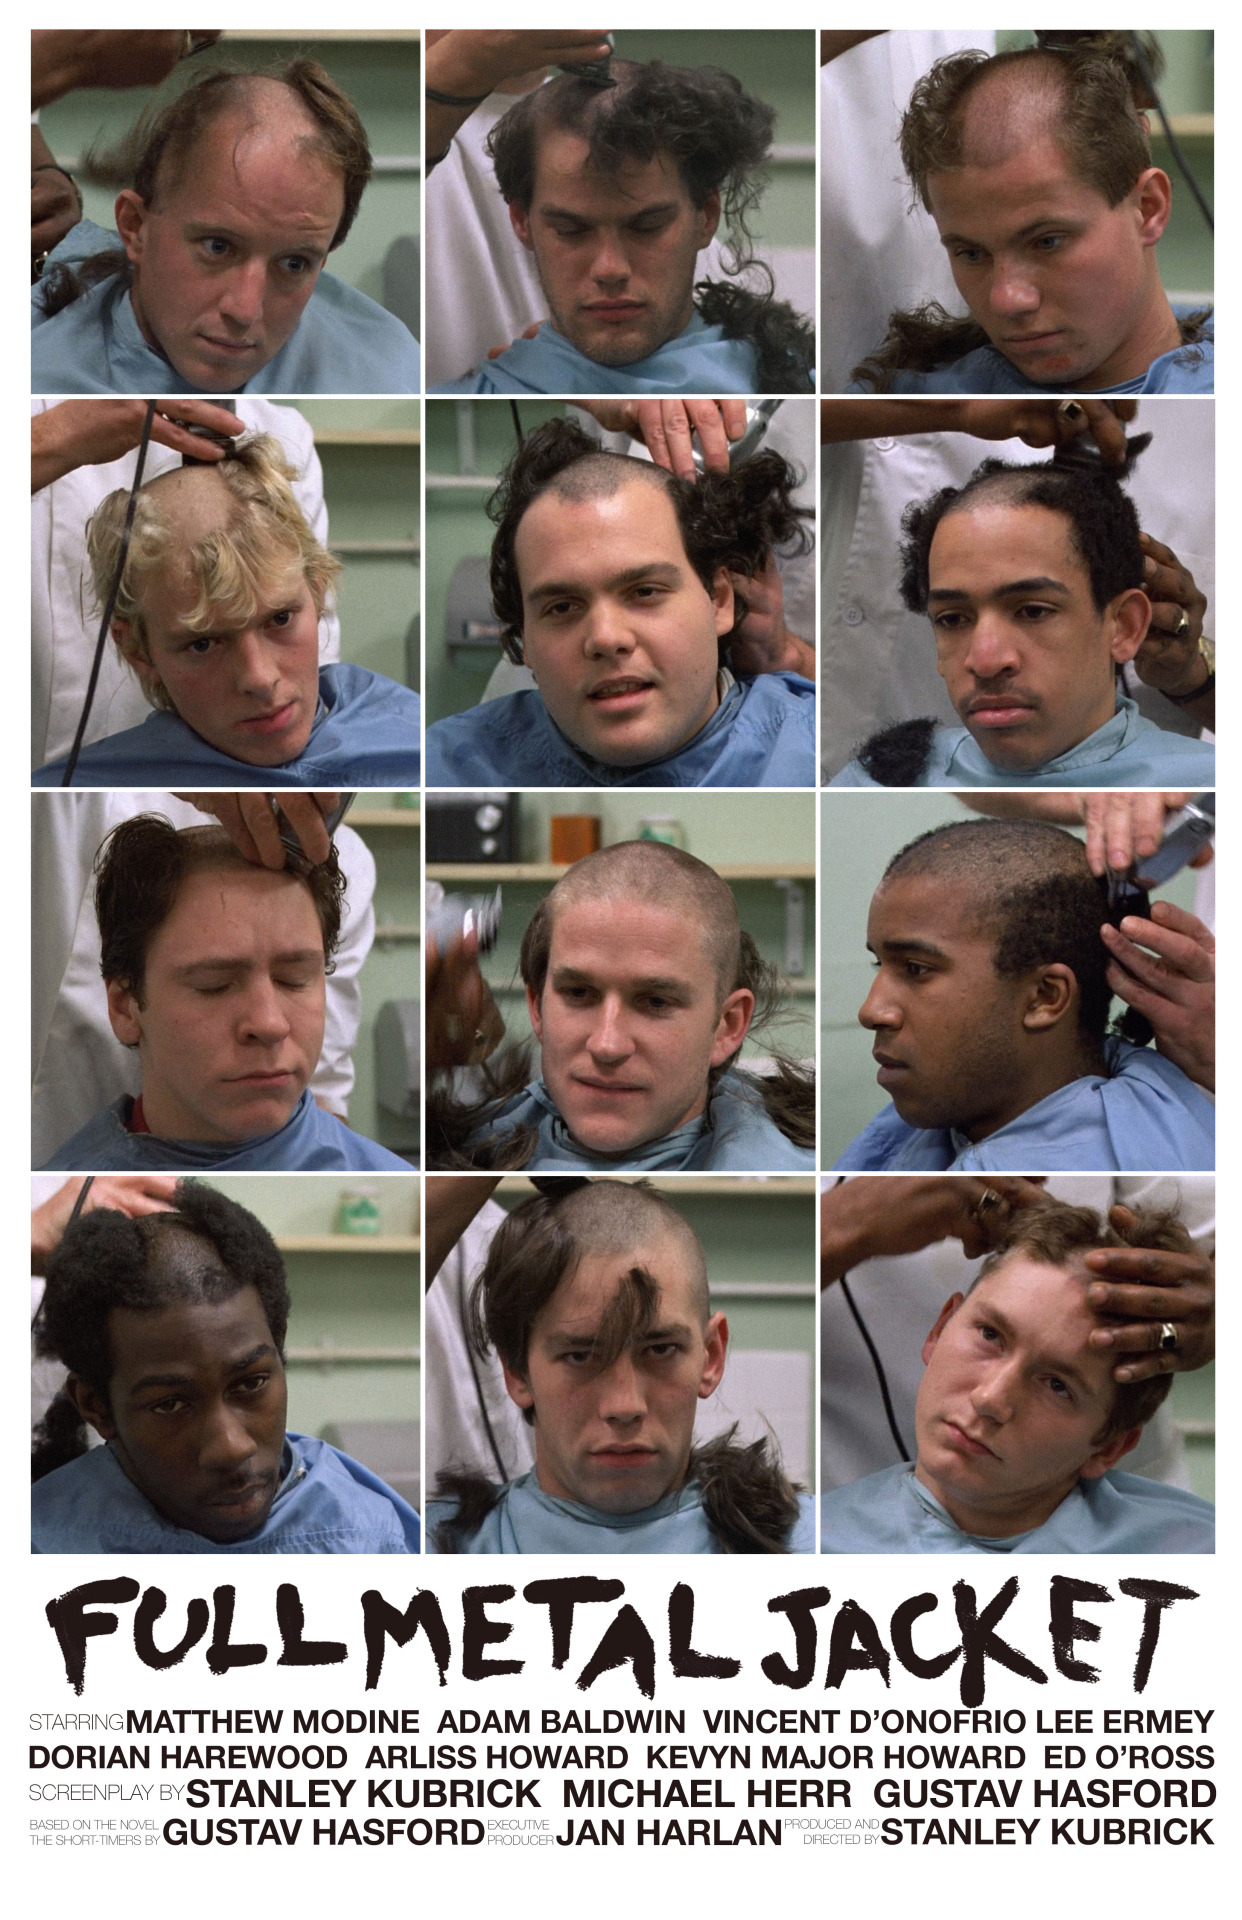 “Full Metal Jacket” poster showing all the main characters getting their boot camp buzz cut.